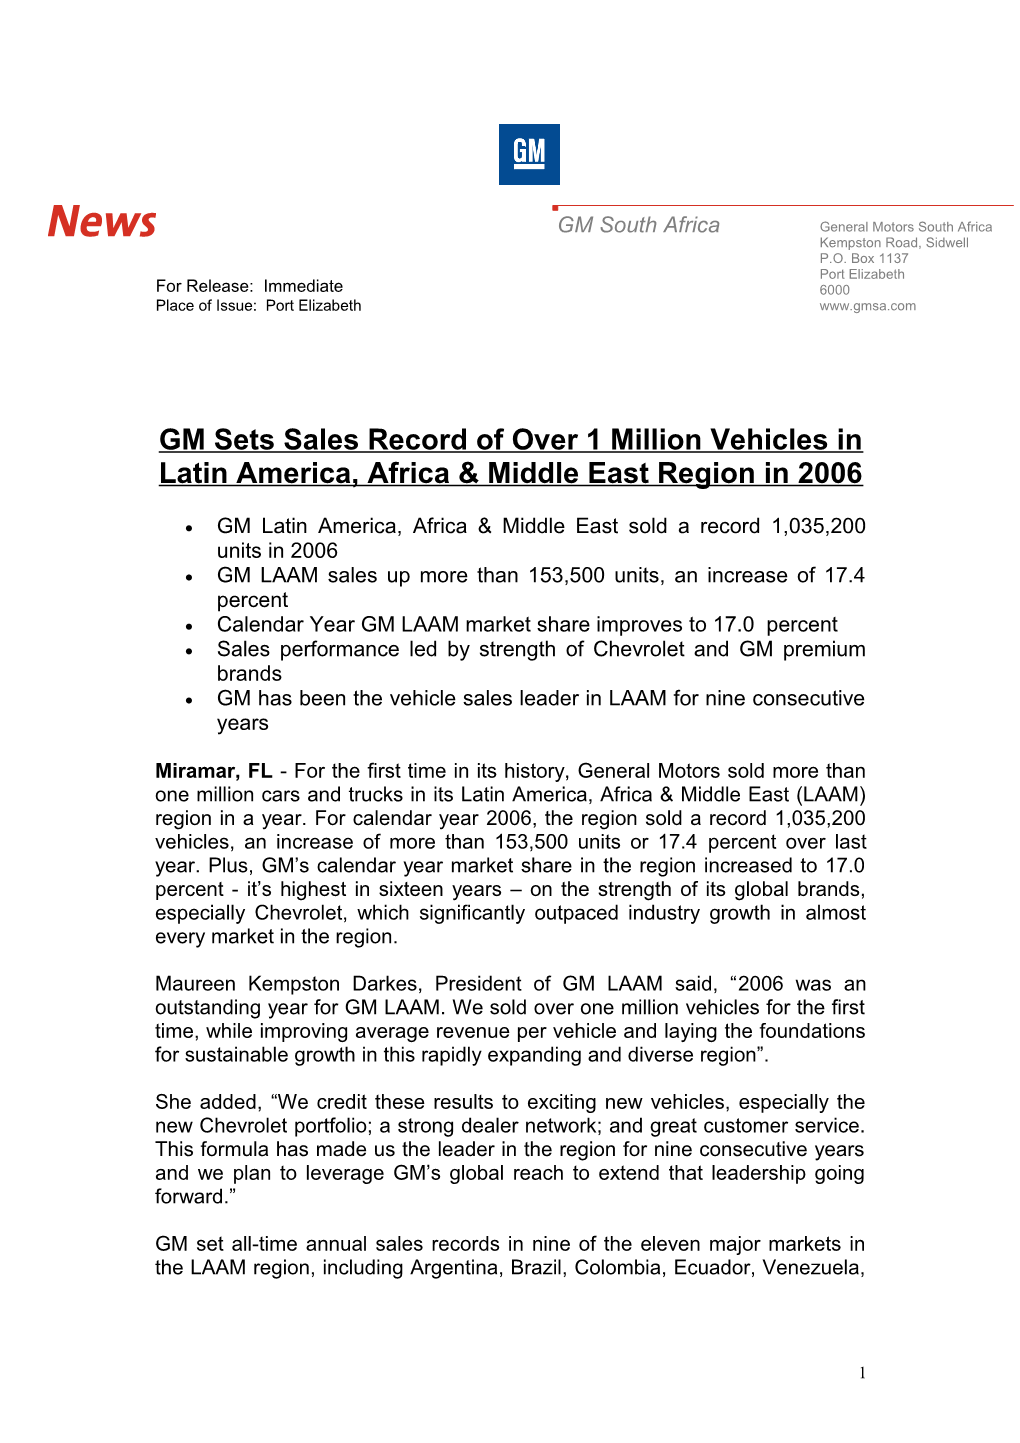 GM Sets Sales Record of Over 1 Million Vehicles In